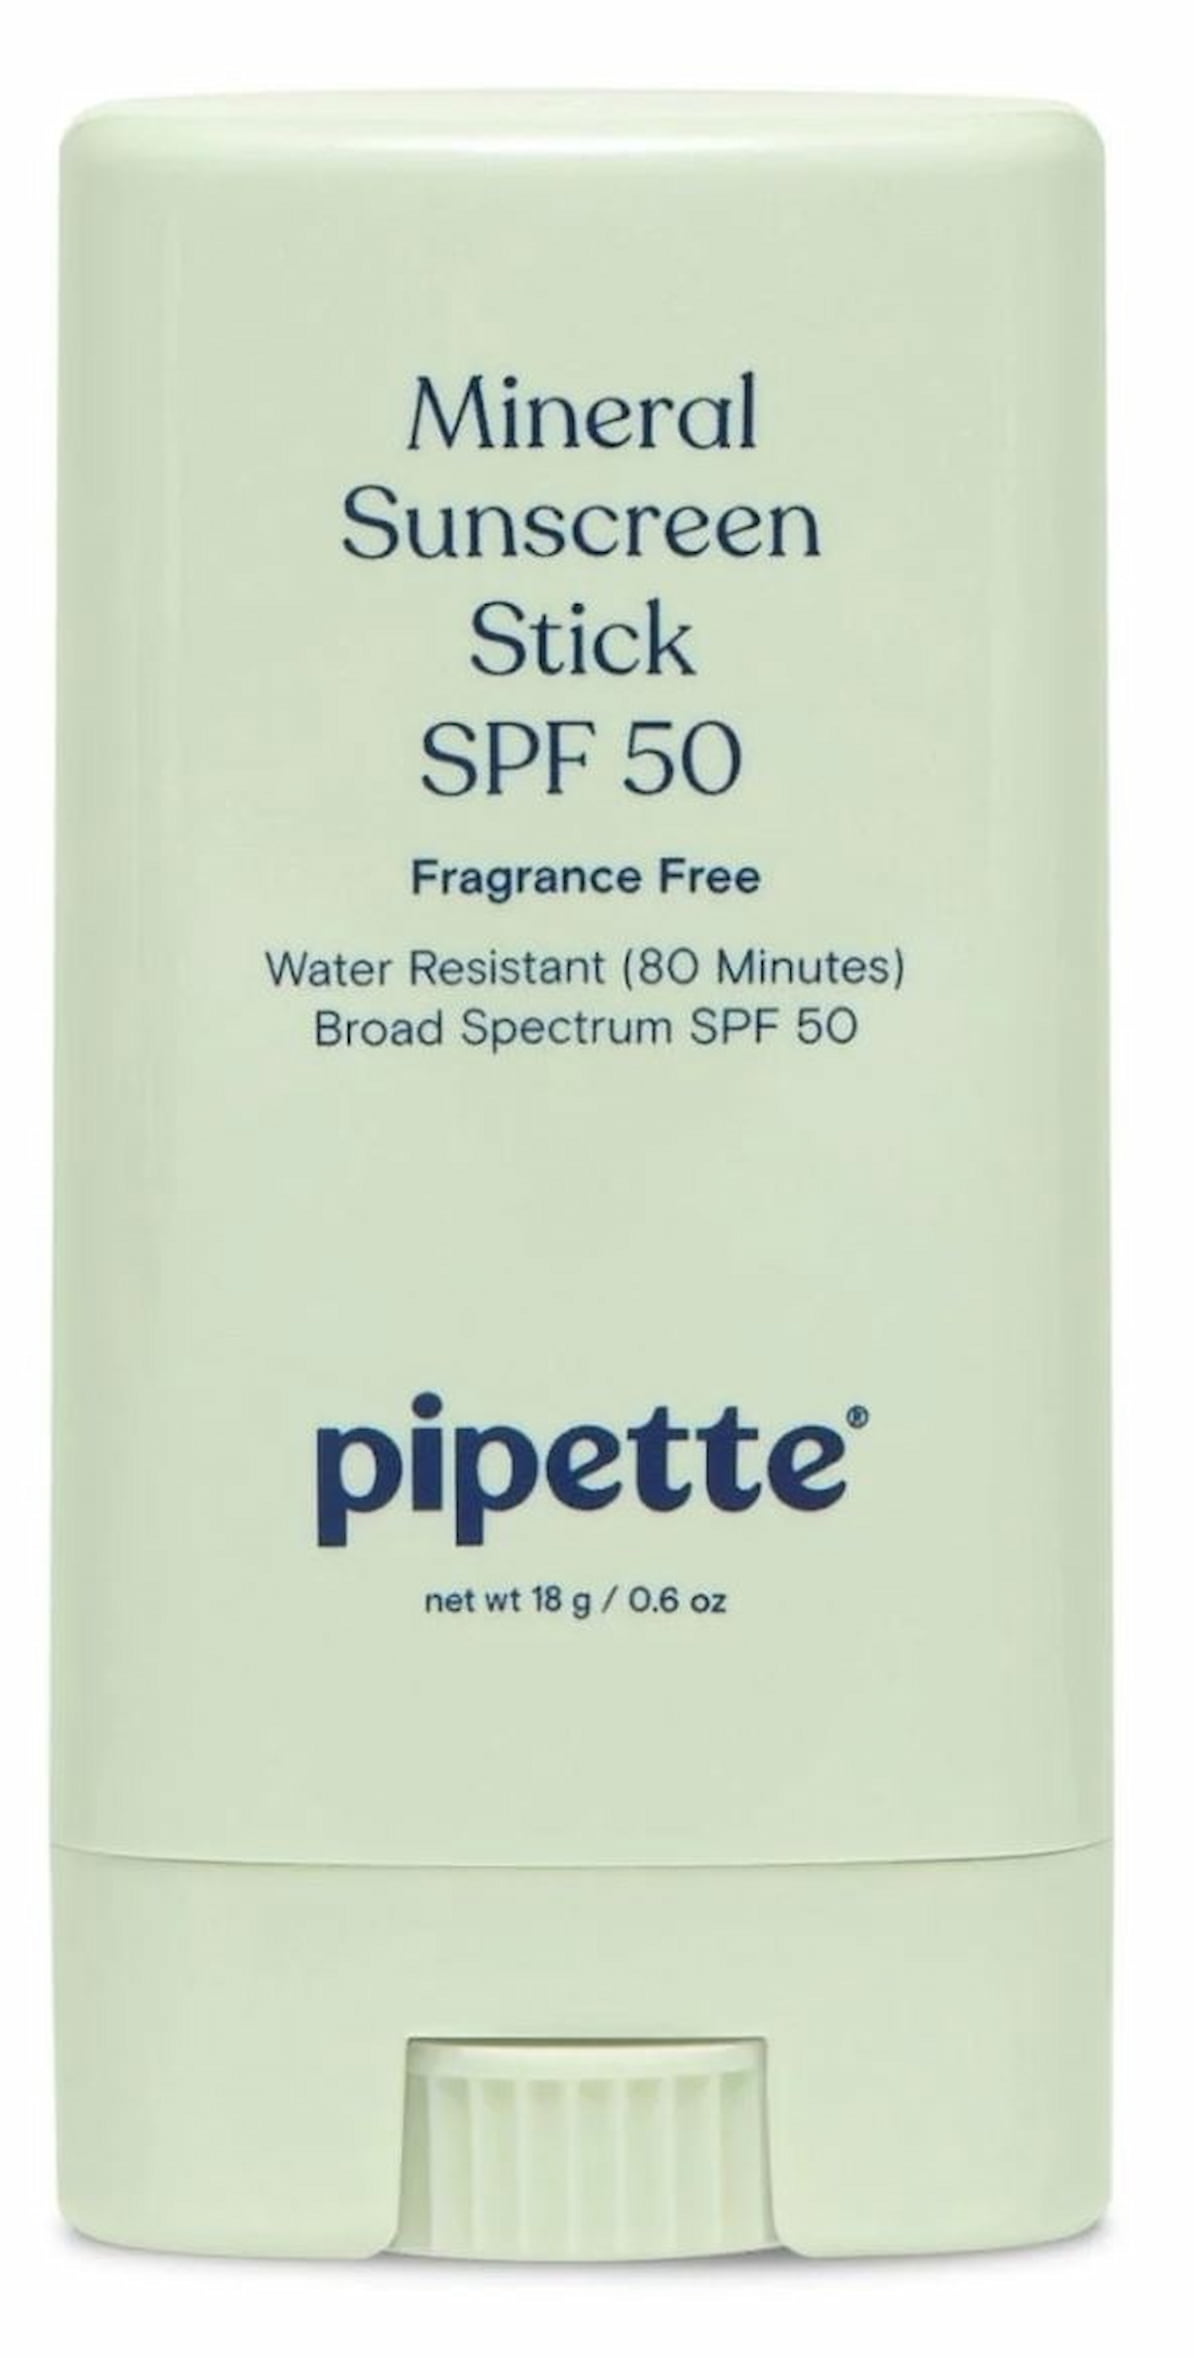 A vegan mineral sunscreen stick by Pipette.